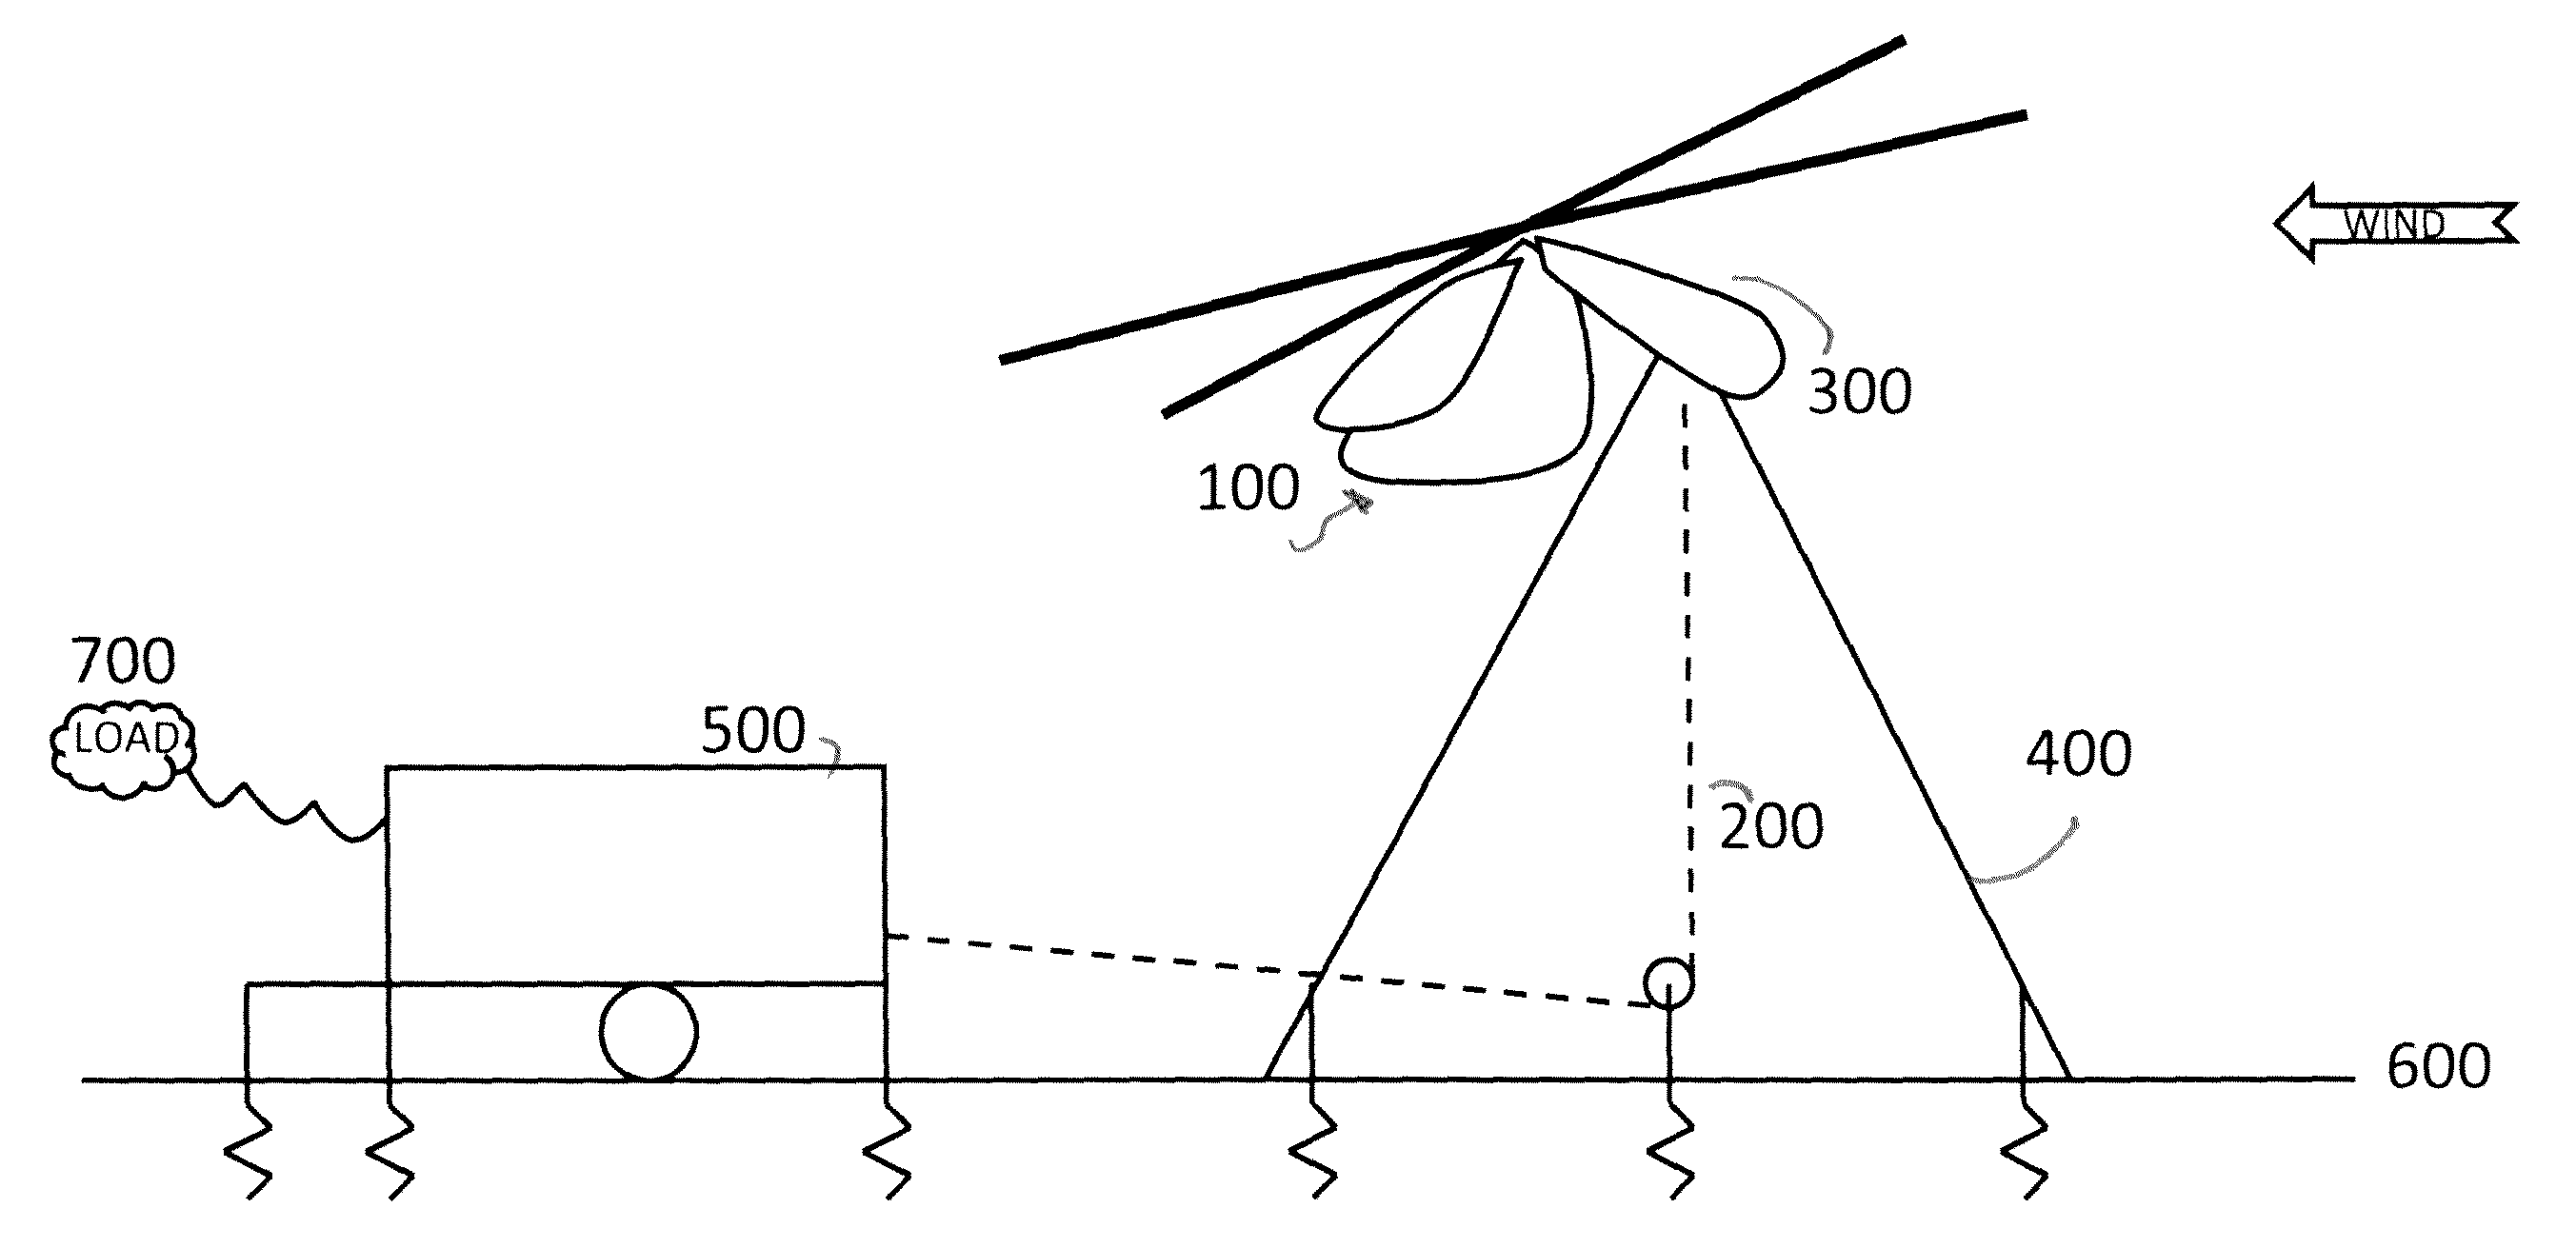 Tethered glider system for power generation